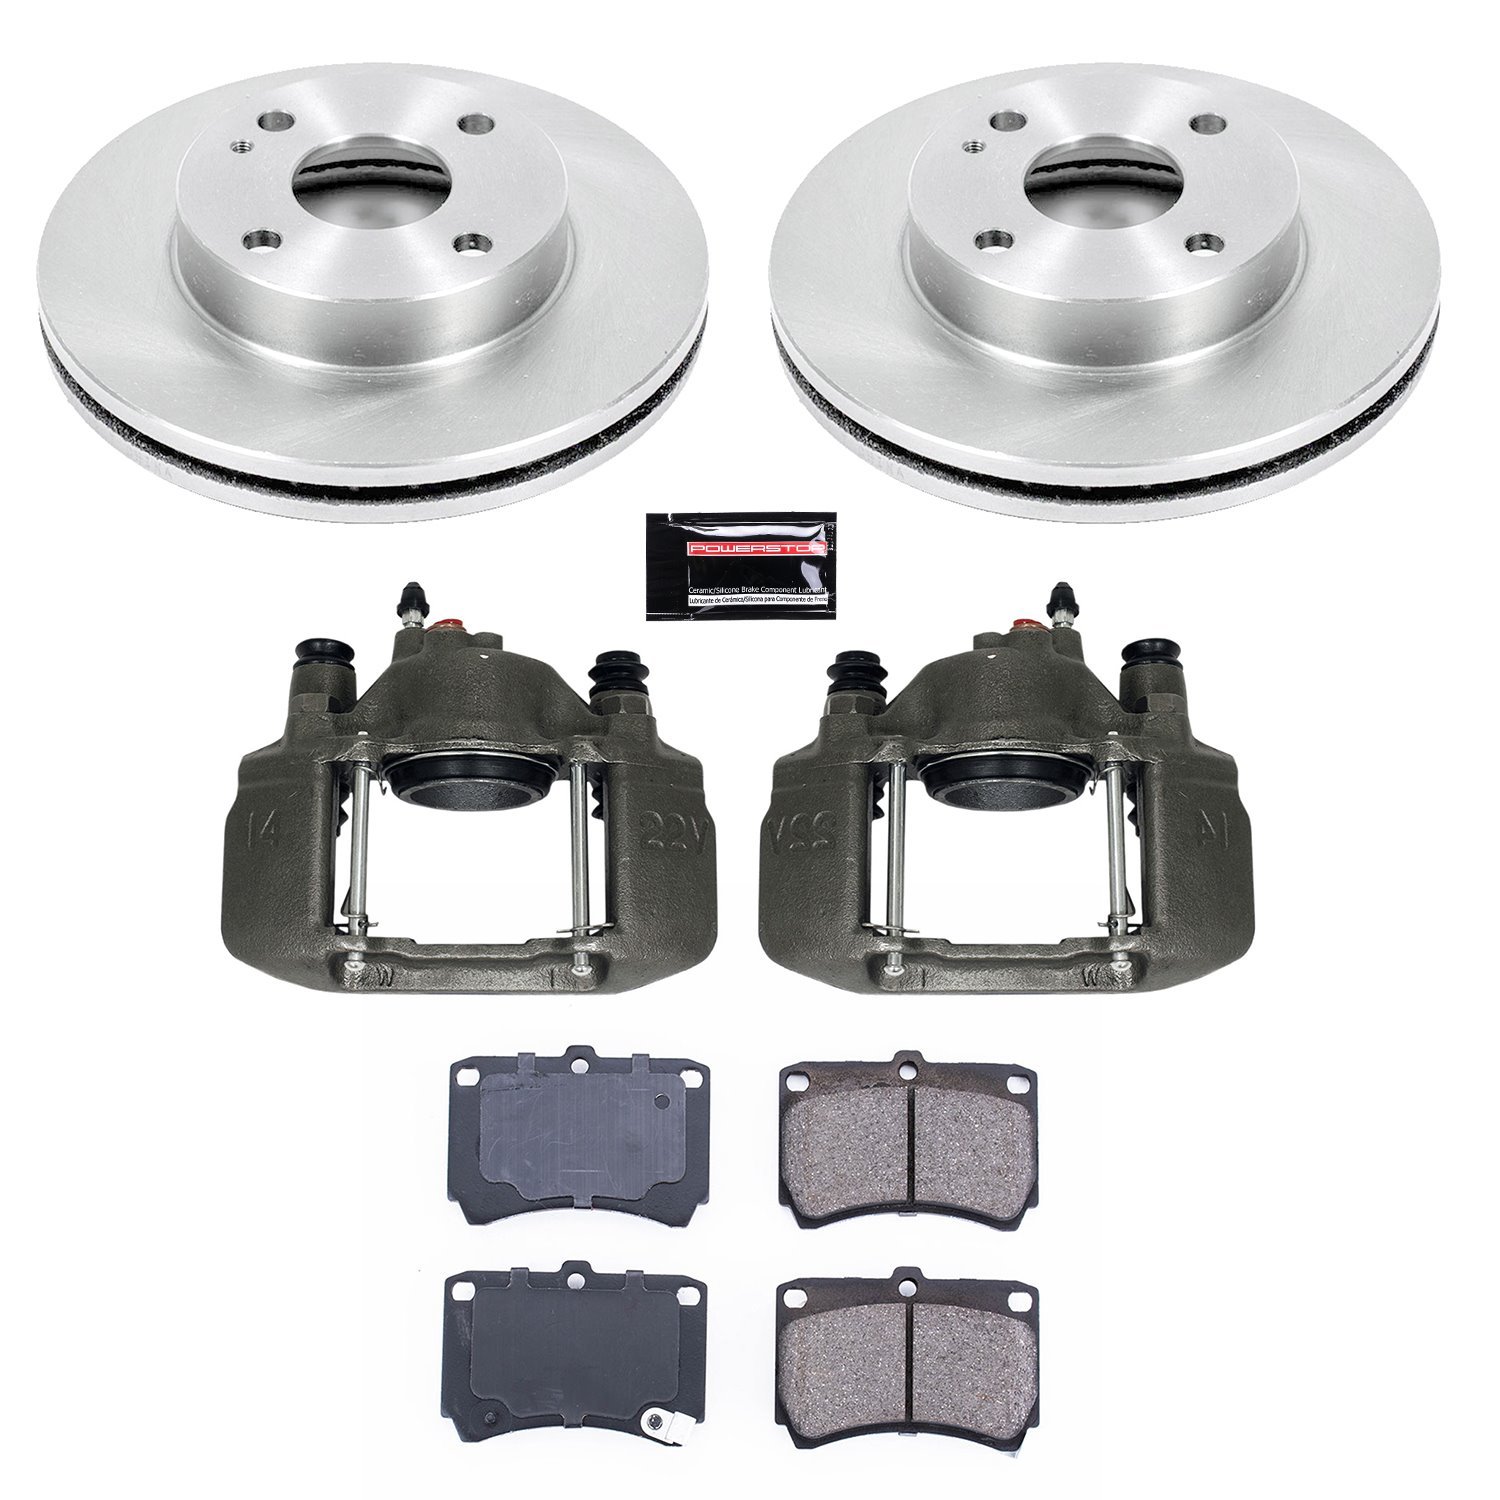 Autospecialty OE Replacement Front Brake Pad and Rotor Kit with Calipers Fits Select 1990-1998 Ford, Mazda, Mercury Models